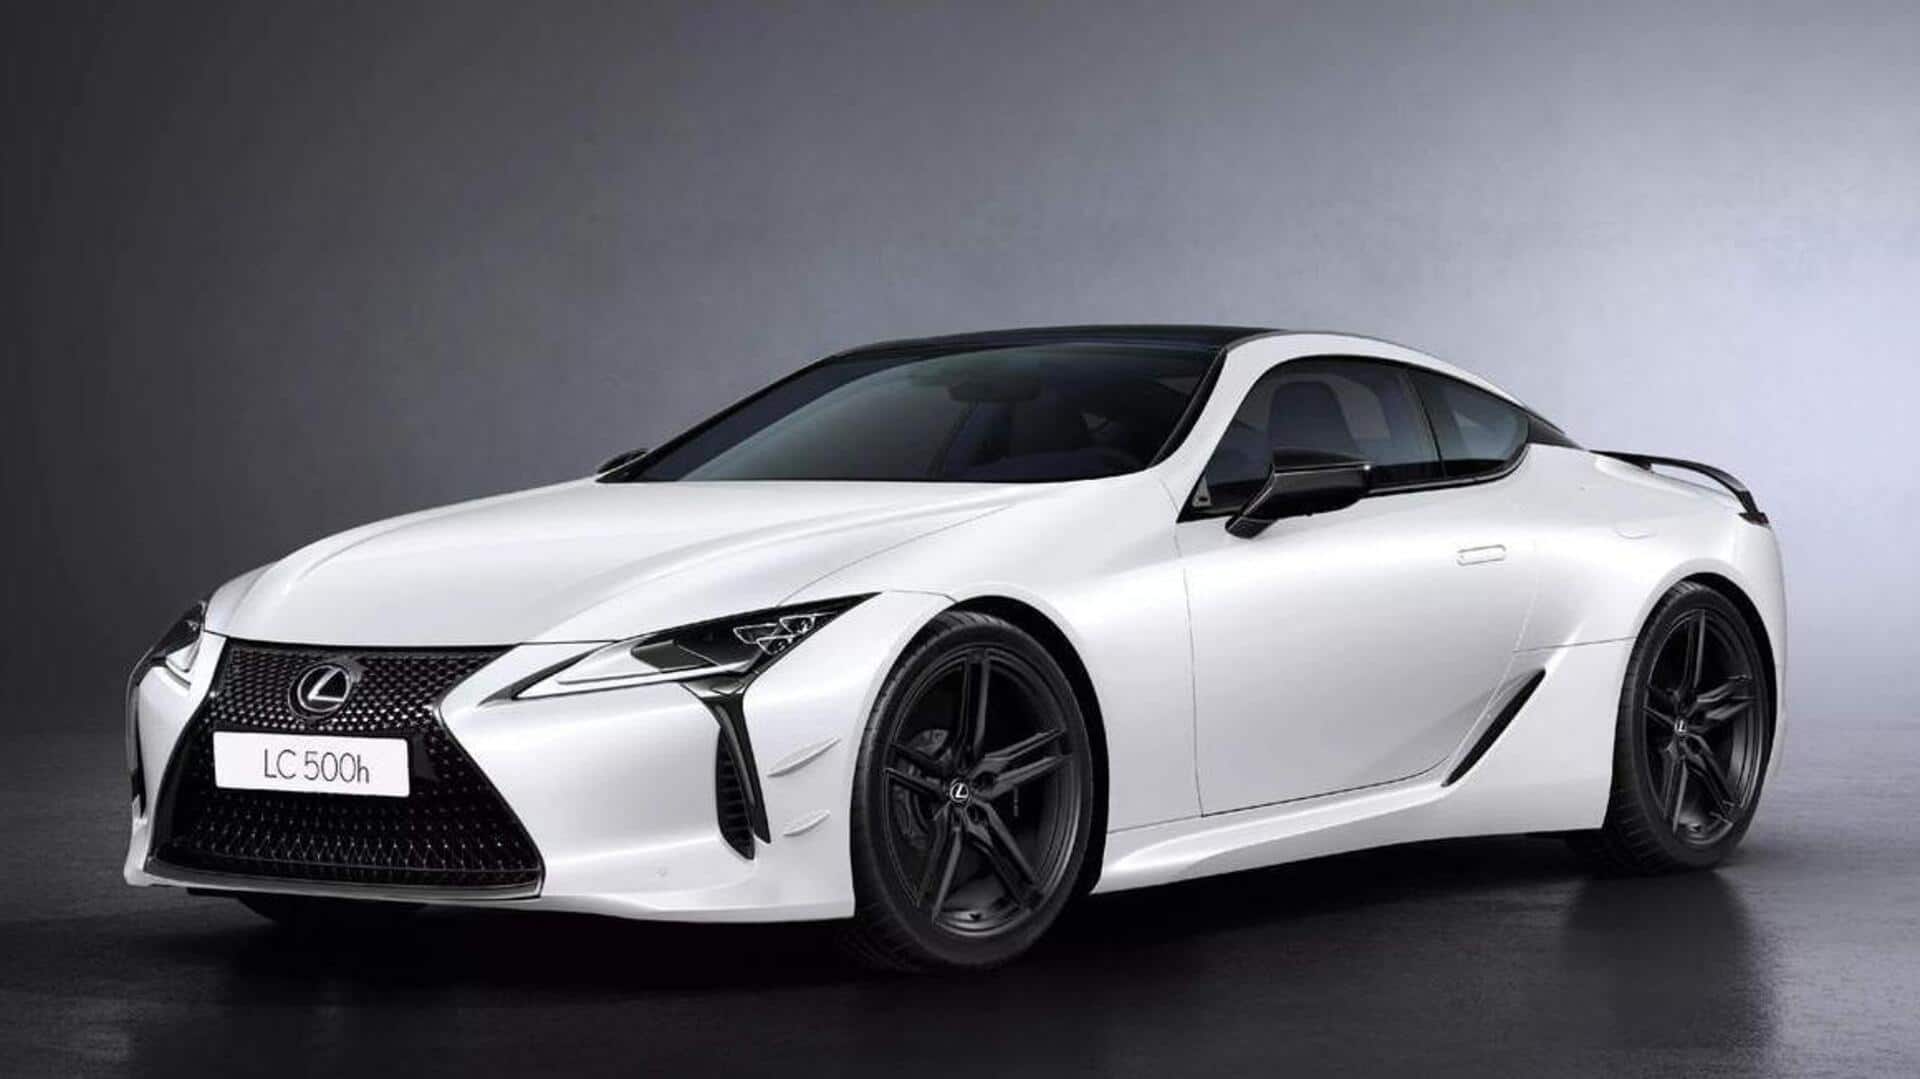 Lexus LC500h Limited Edition arrives at Rs. 2.5 crore